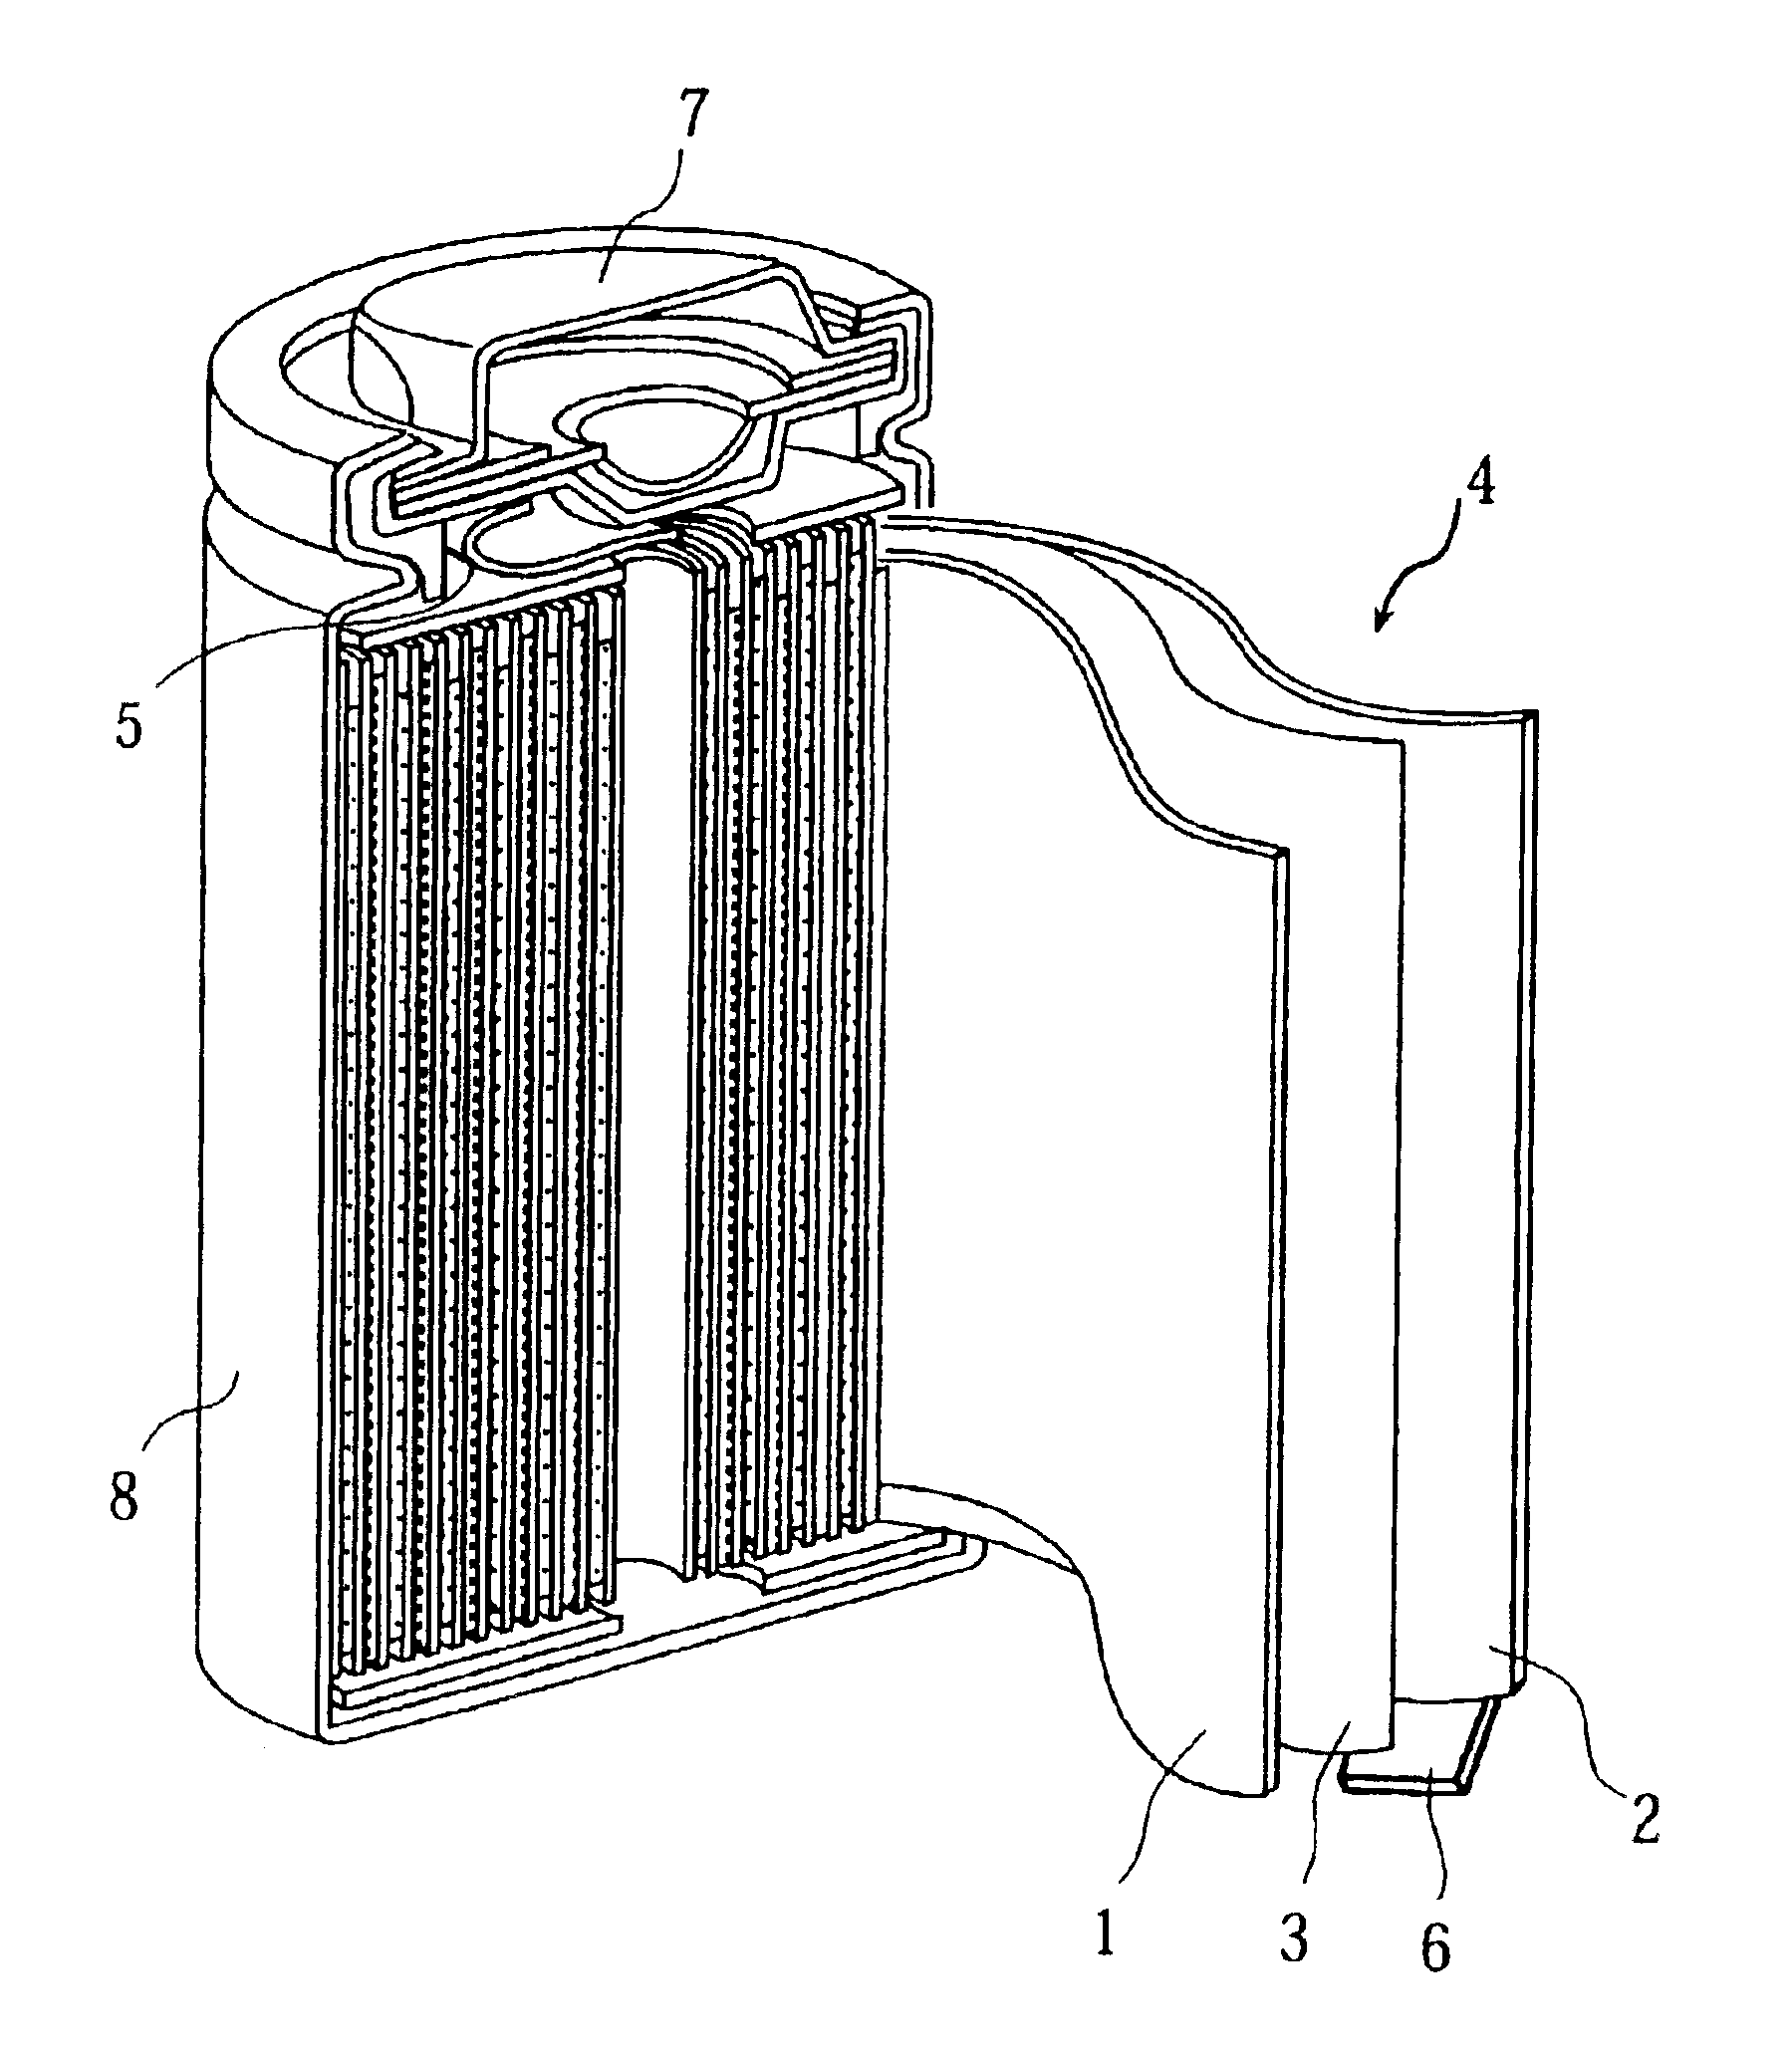 Nonaqueous electrolyte secondary cell and method of manufacturing the same